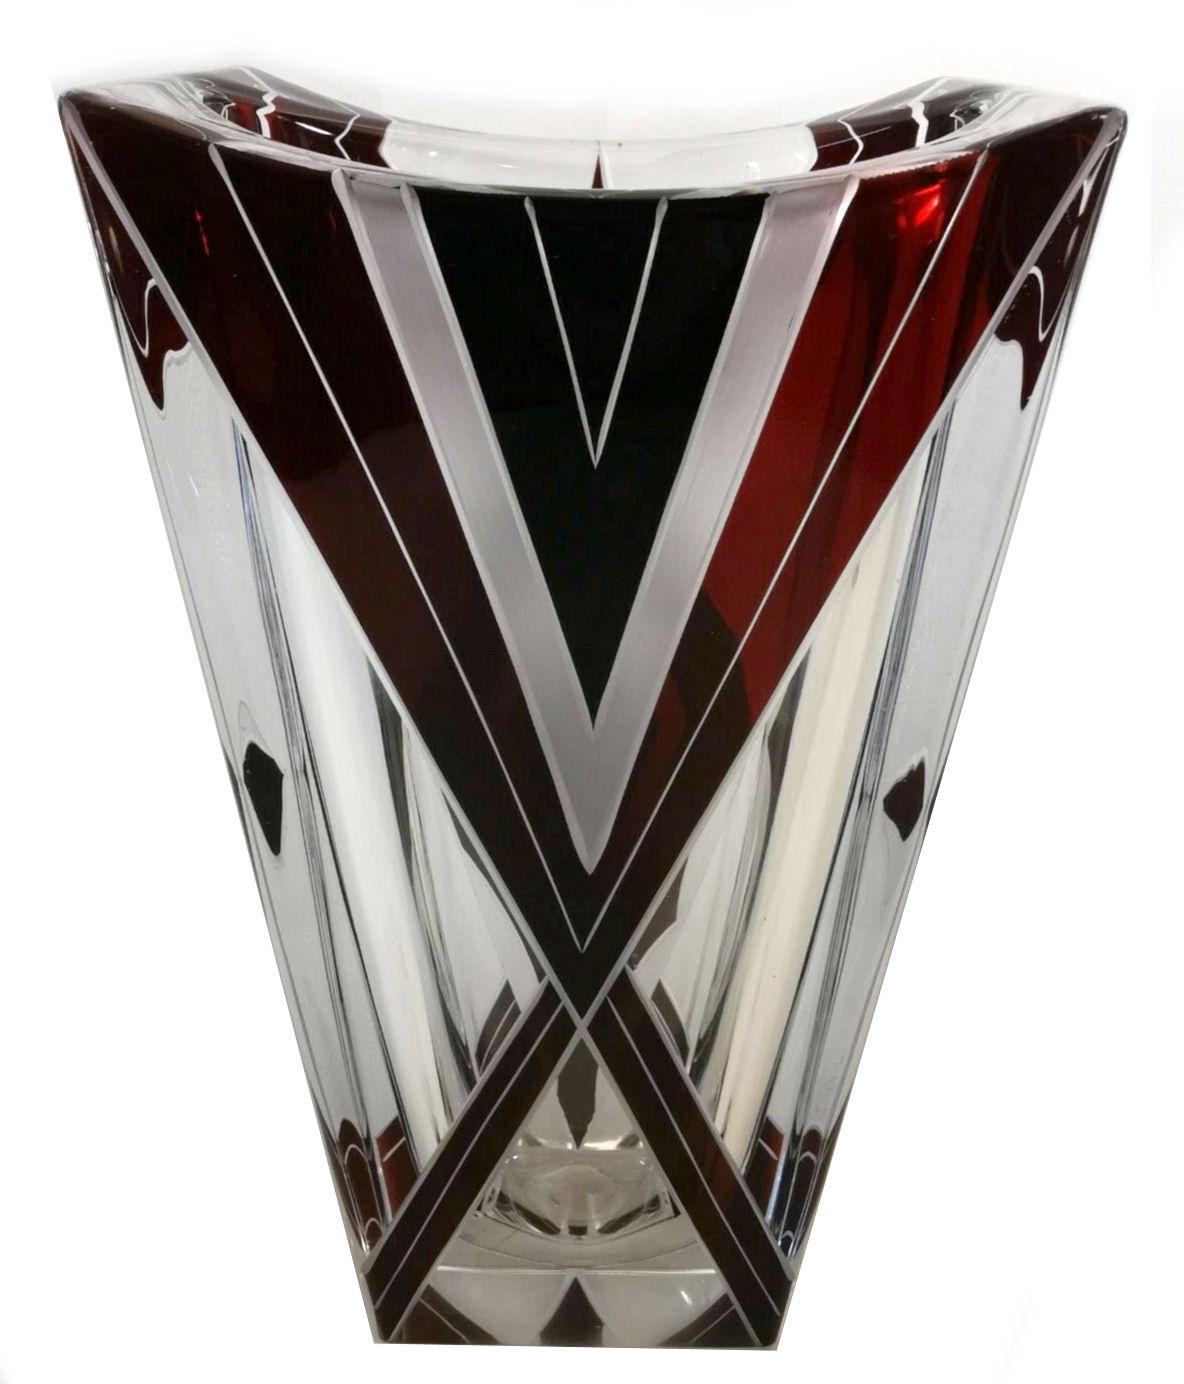 For your consideration is this very distinctive 1930s Art Deco glass vase possibly by Karl Palda and what a gem it is. It really does stand out and is in lovely condition and with the most glorious geometric decoration. Very heavy quality crystal